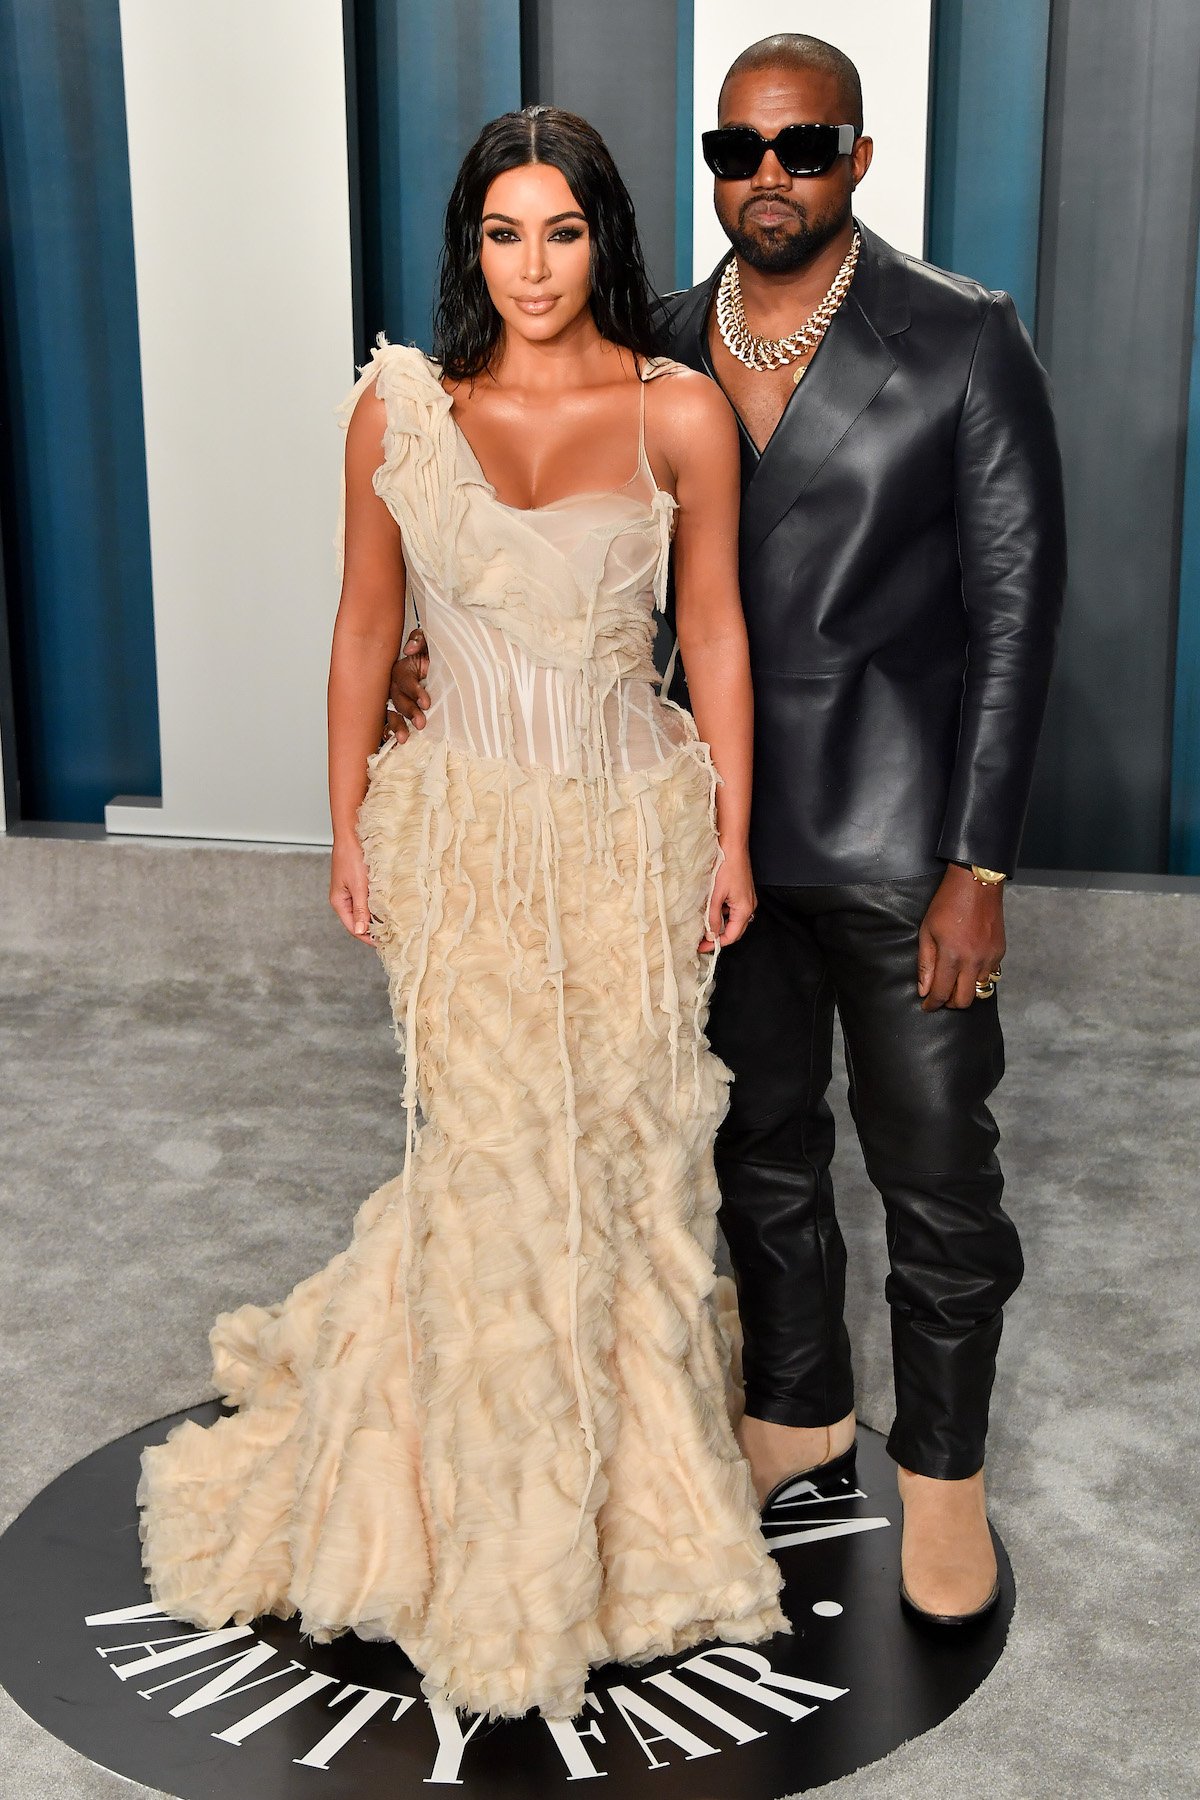 Kim Kardashian West and Kanye West pose together in formal attire at an event.